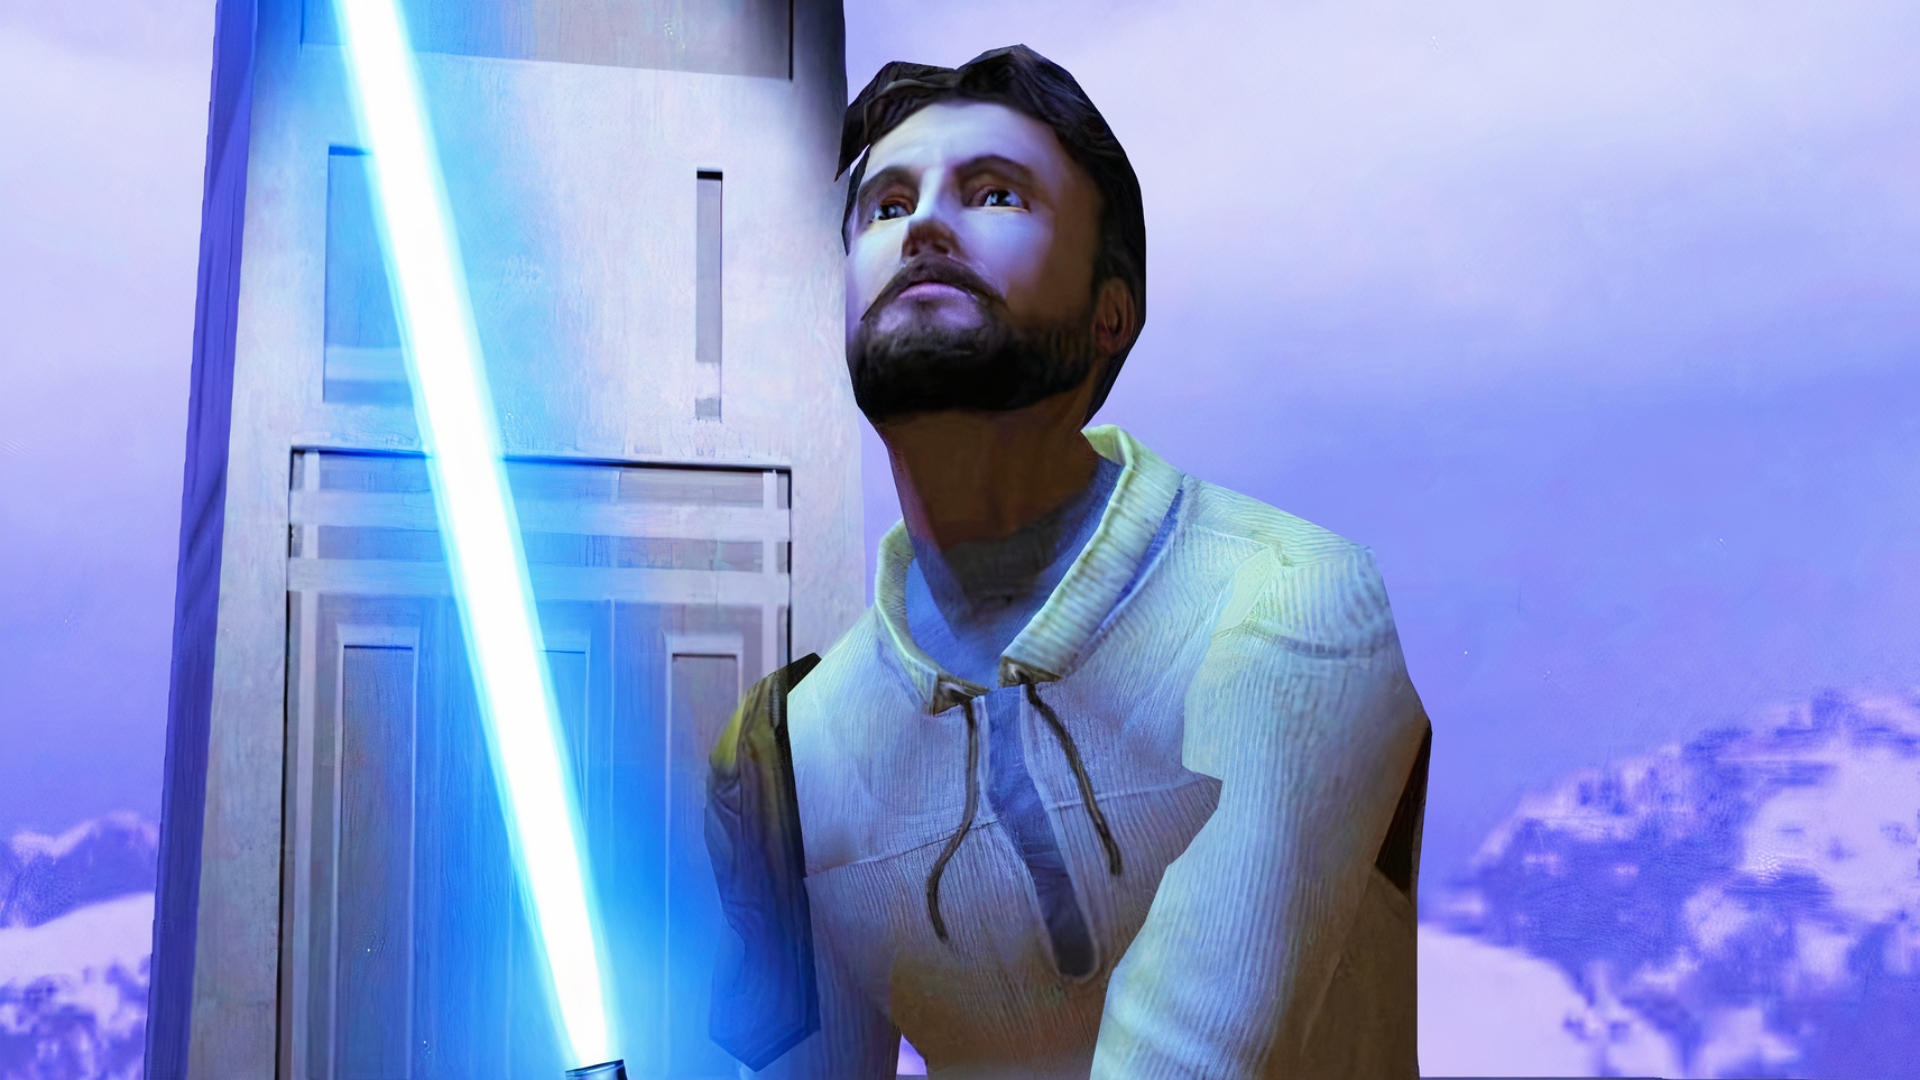 Star Wars Outcast is out now, with motion-control | PCGamesN